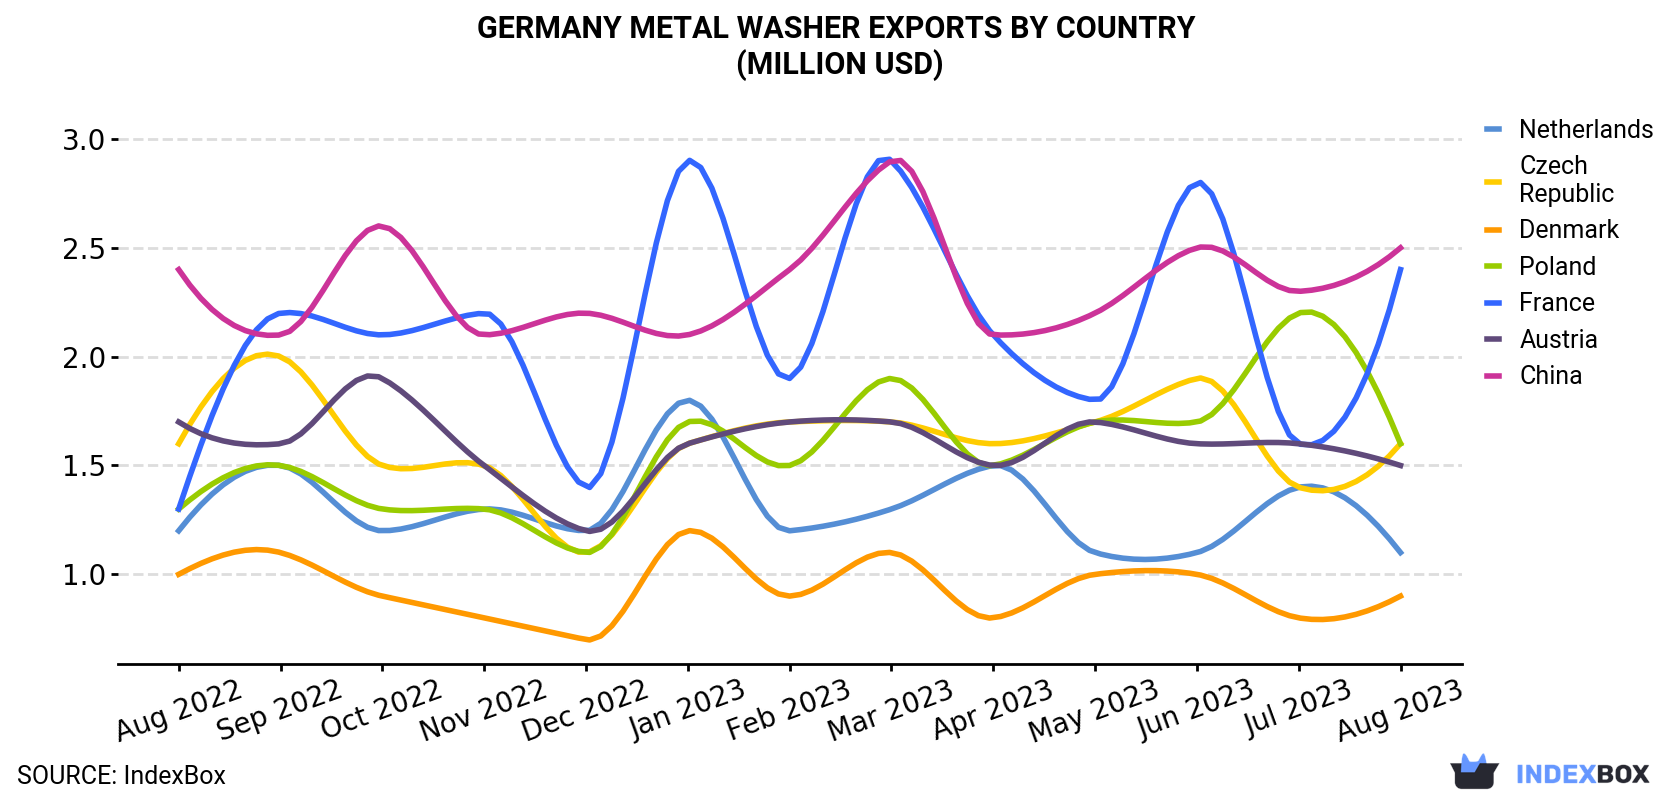 Germany Metal Washer Exports By Country (Million USD)